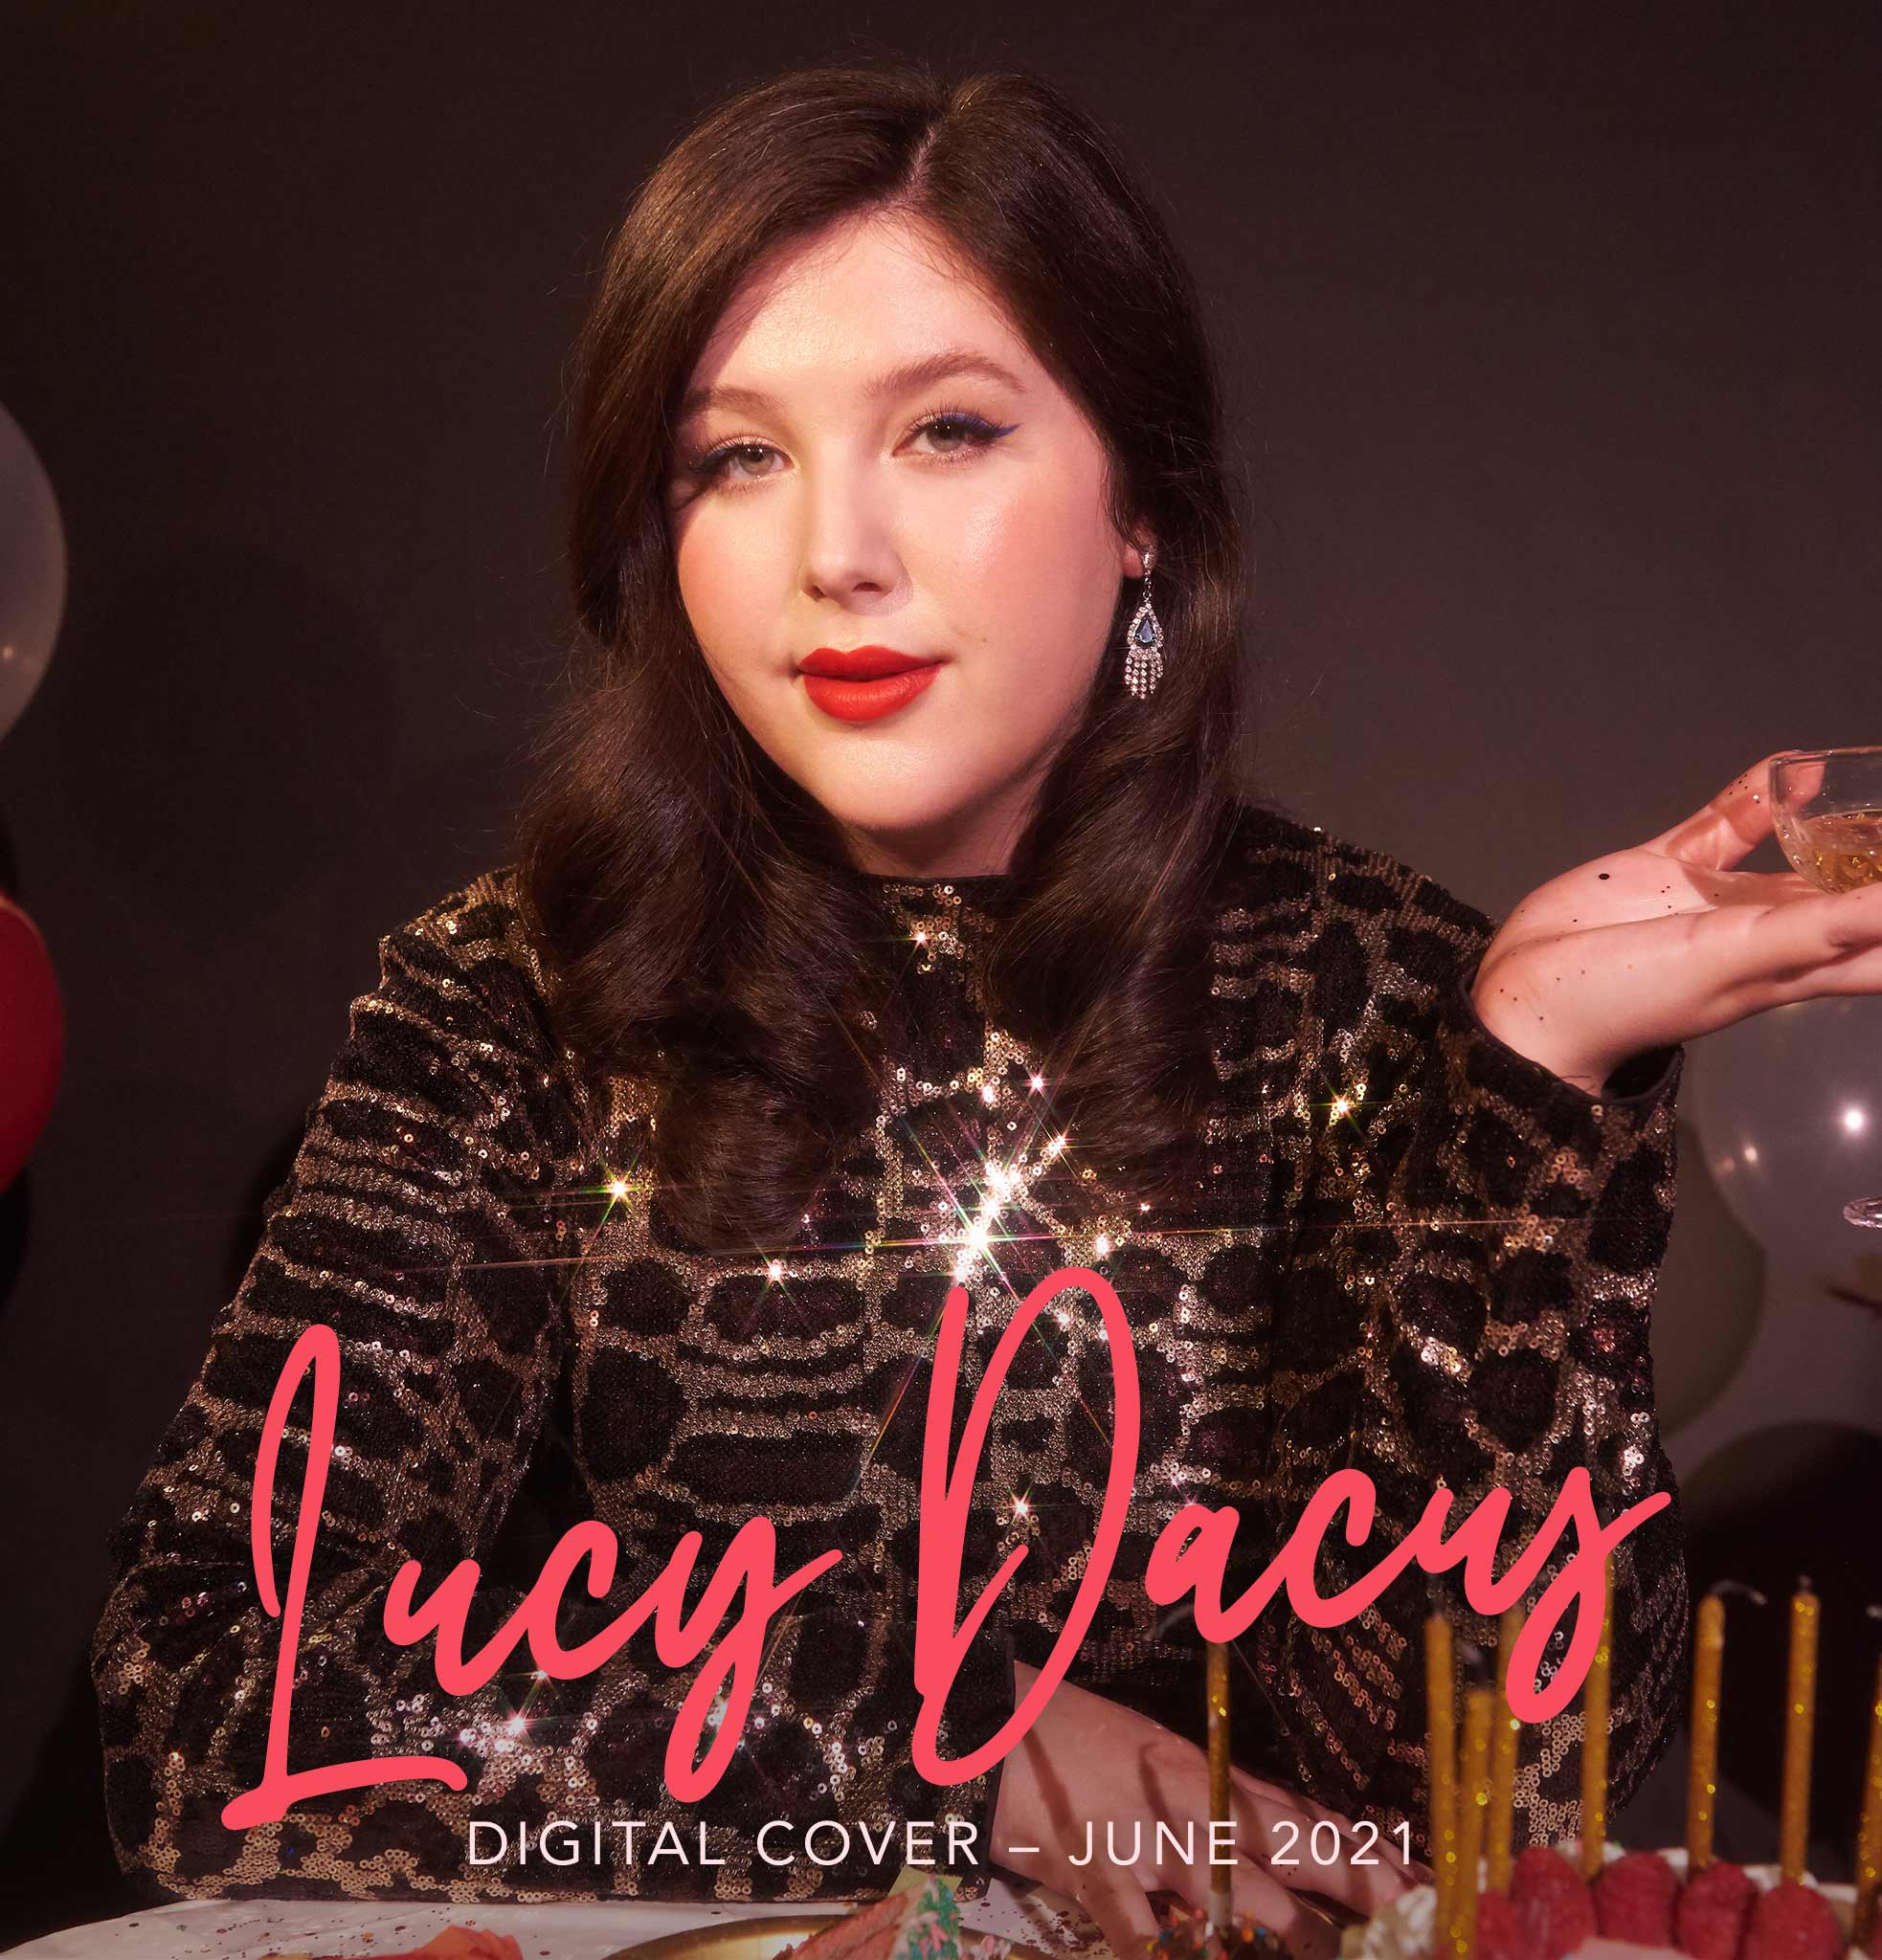 Lucy Dacus interview photoshoot